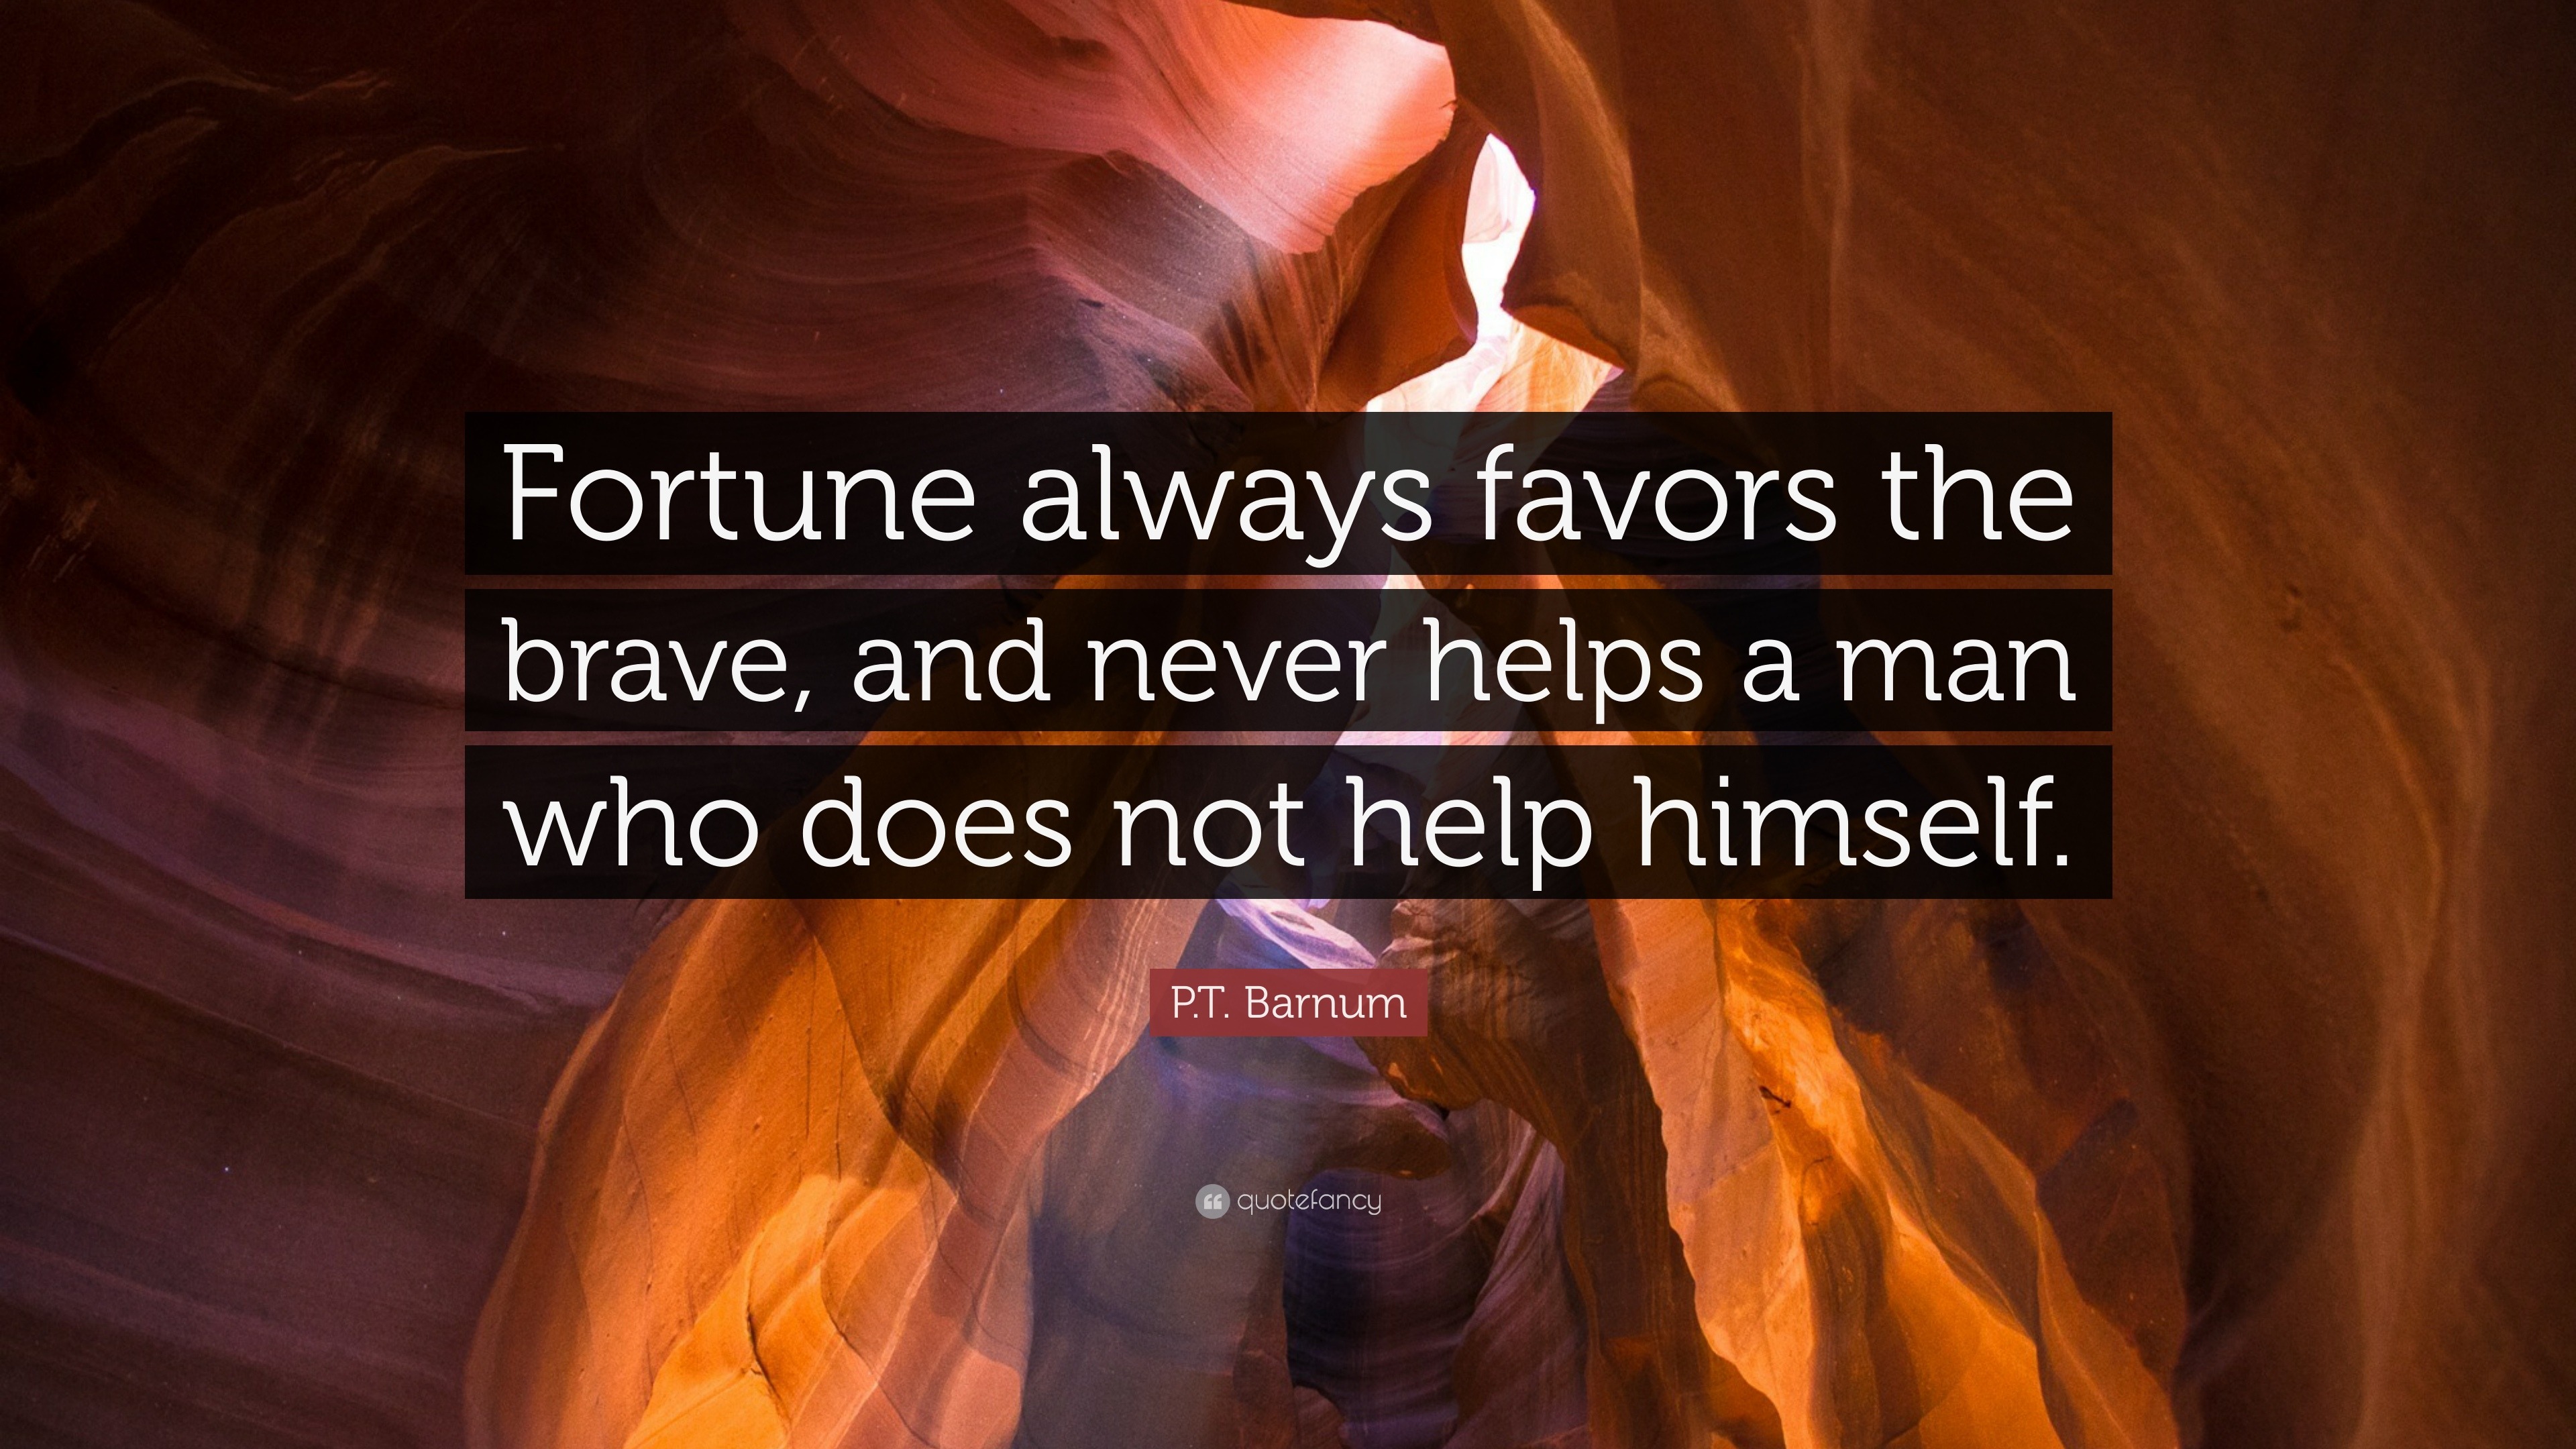 quote fortune favors the brave